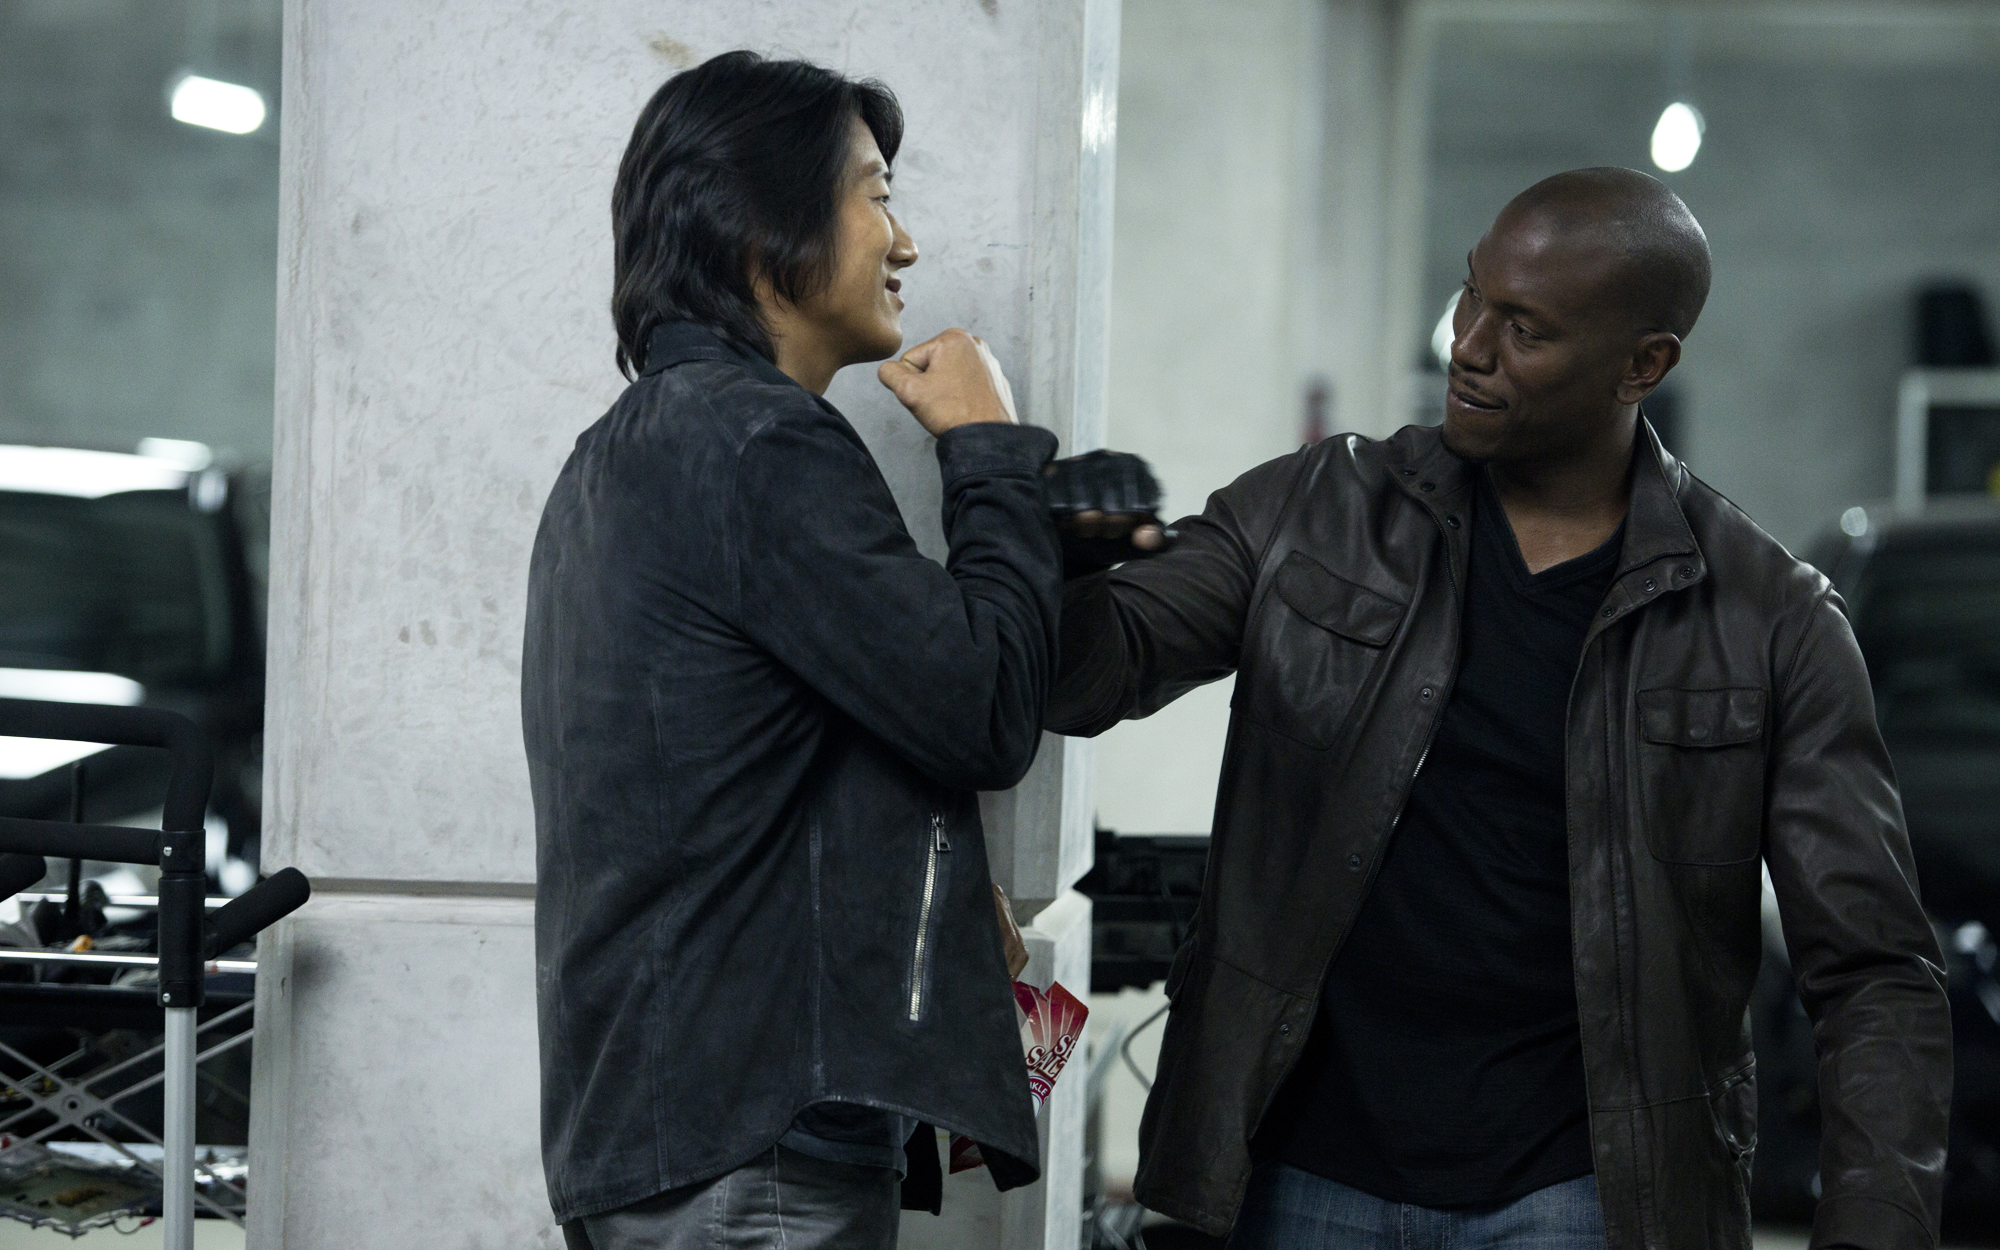 Fast Furious Sung Kang And Tyrese Gibson Wallpaper